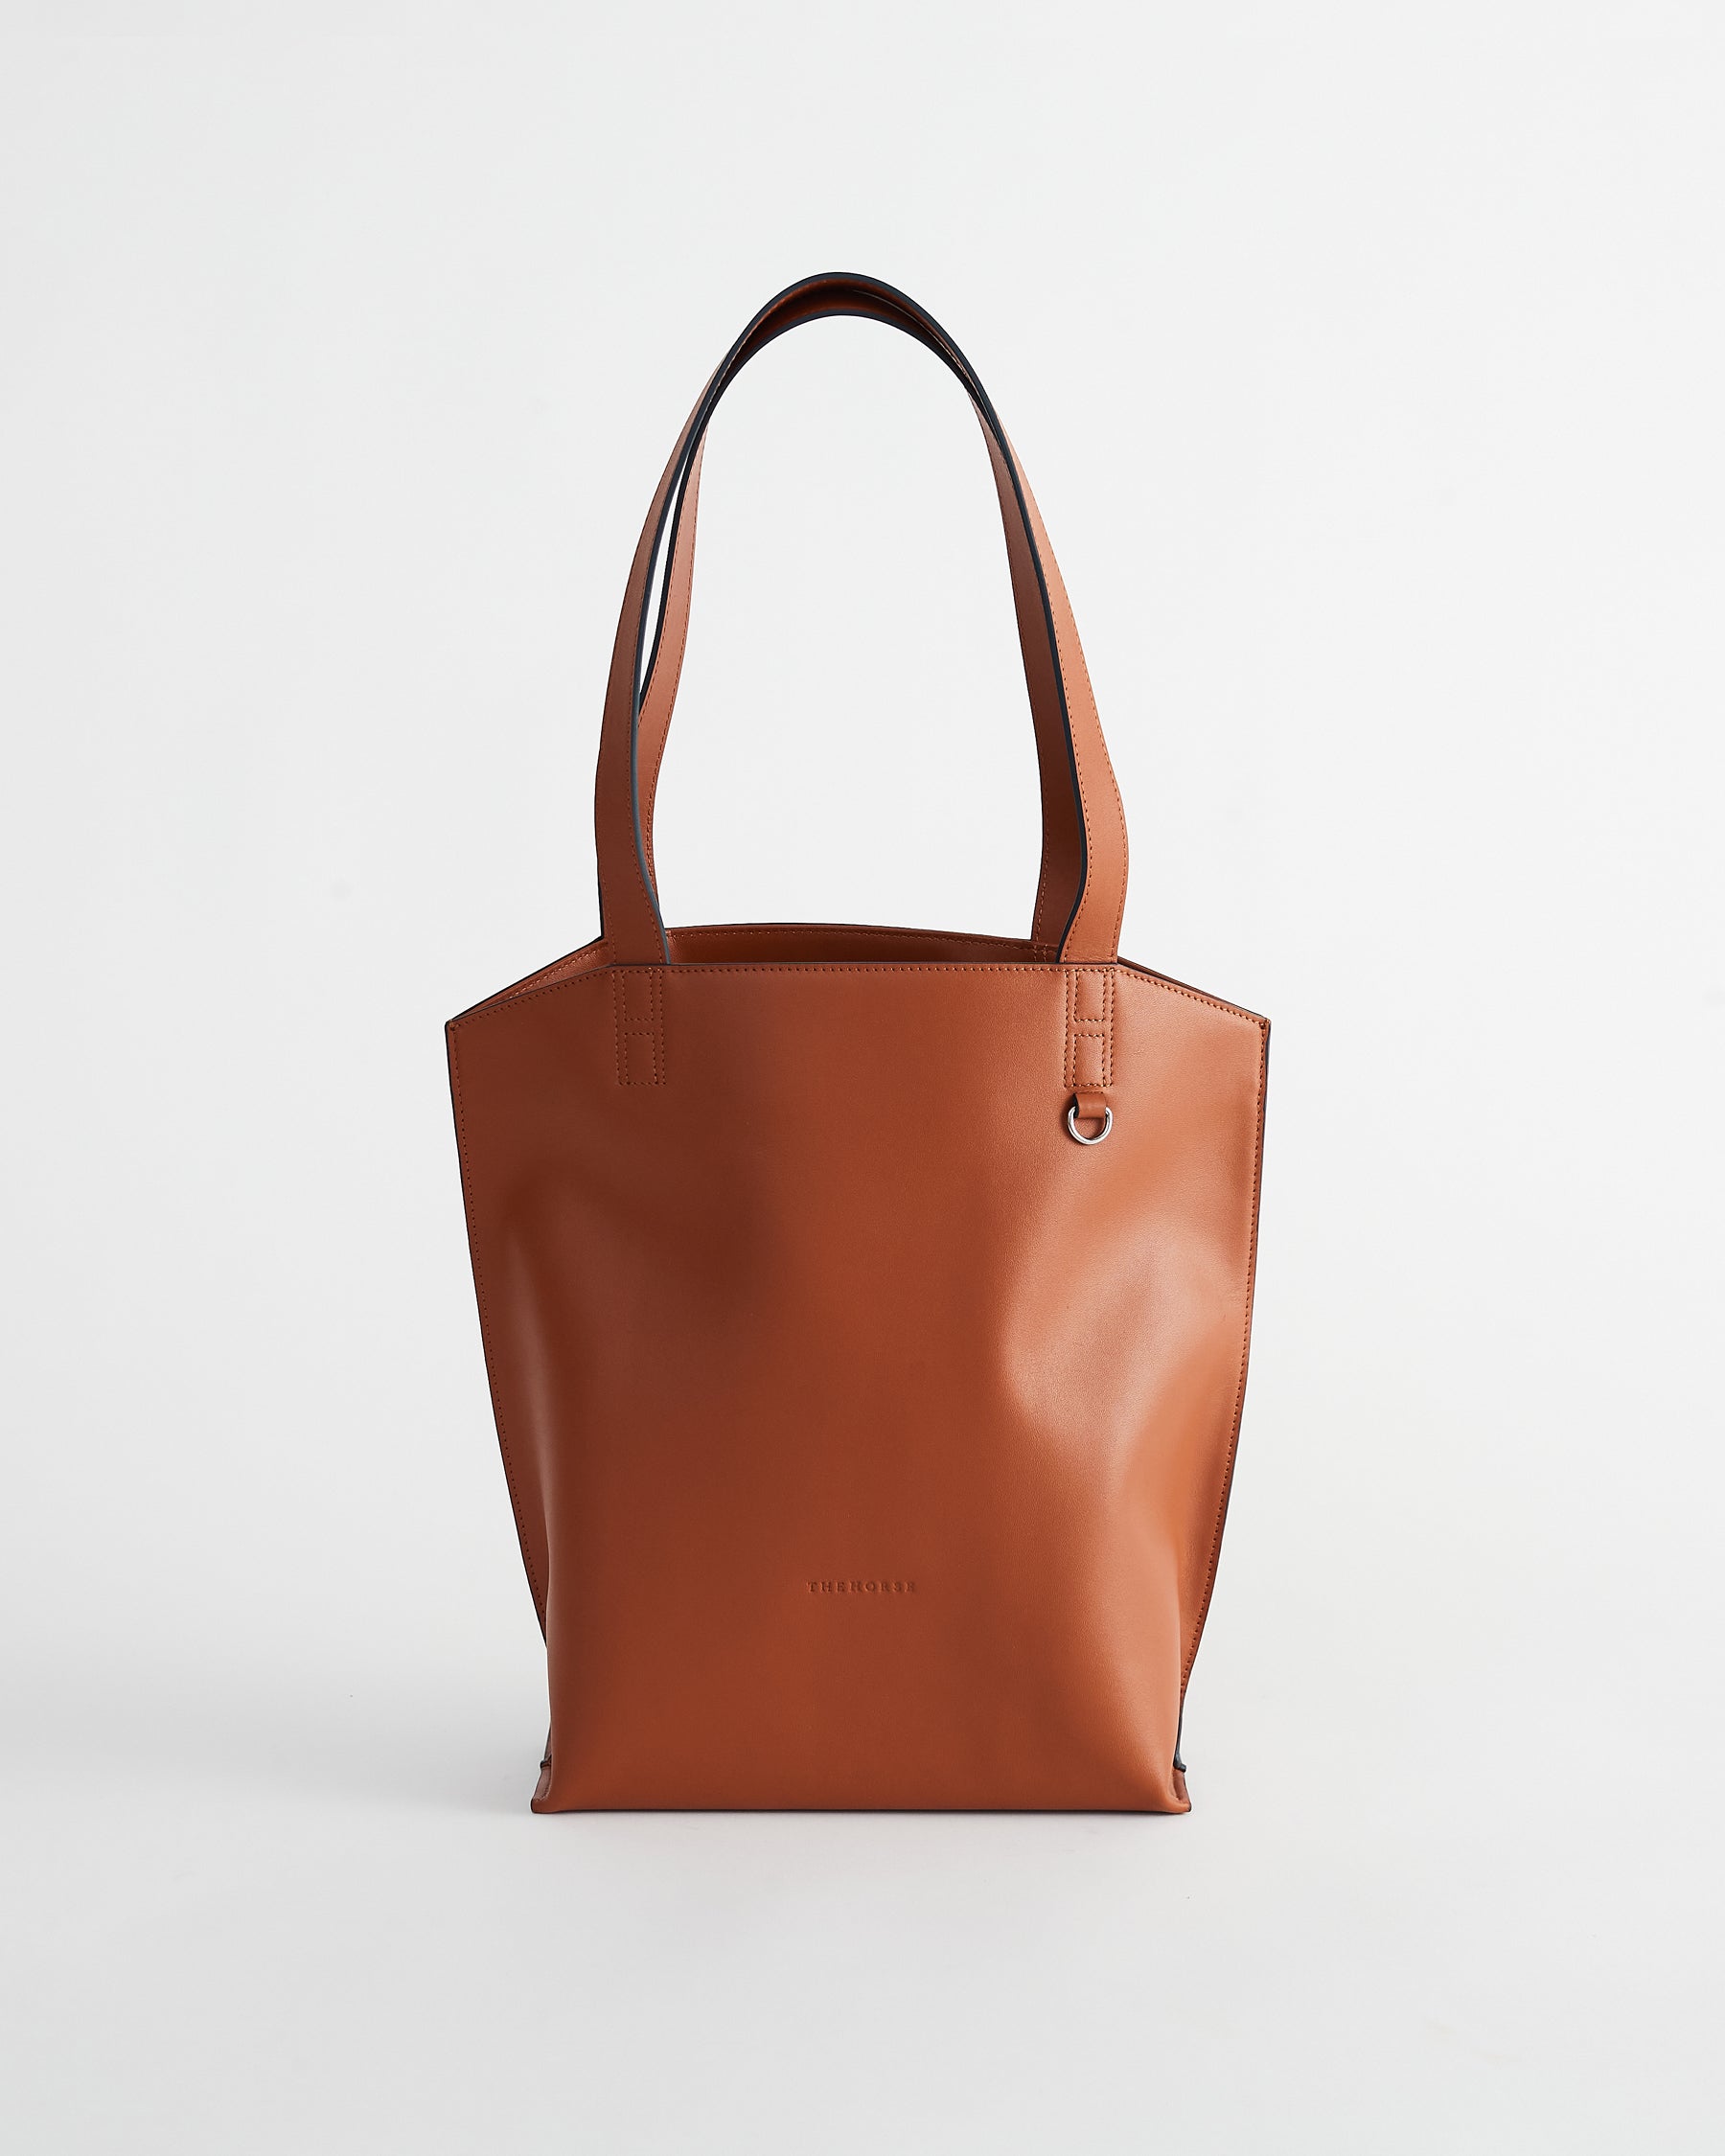 The Florence Leather Tote Bag in Tan by The Horse®